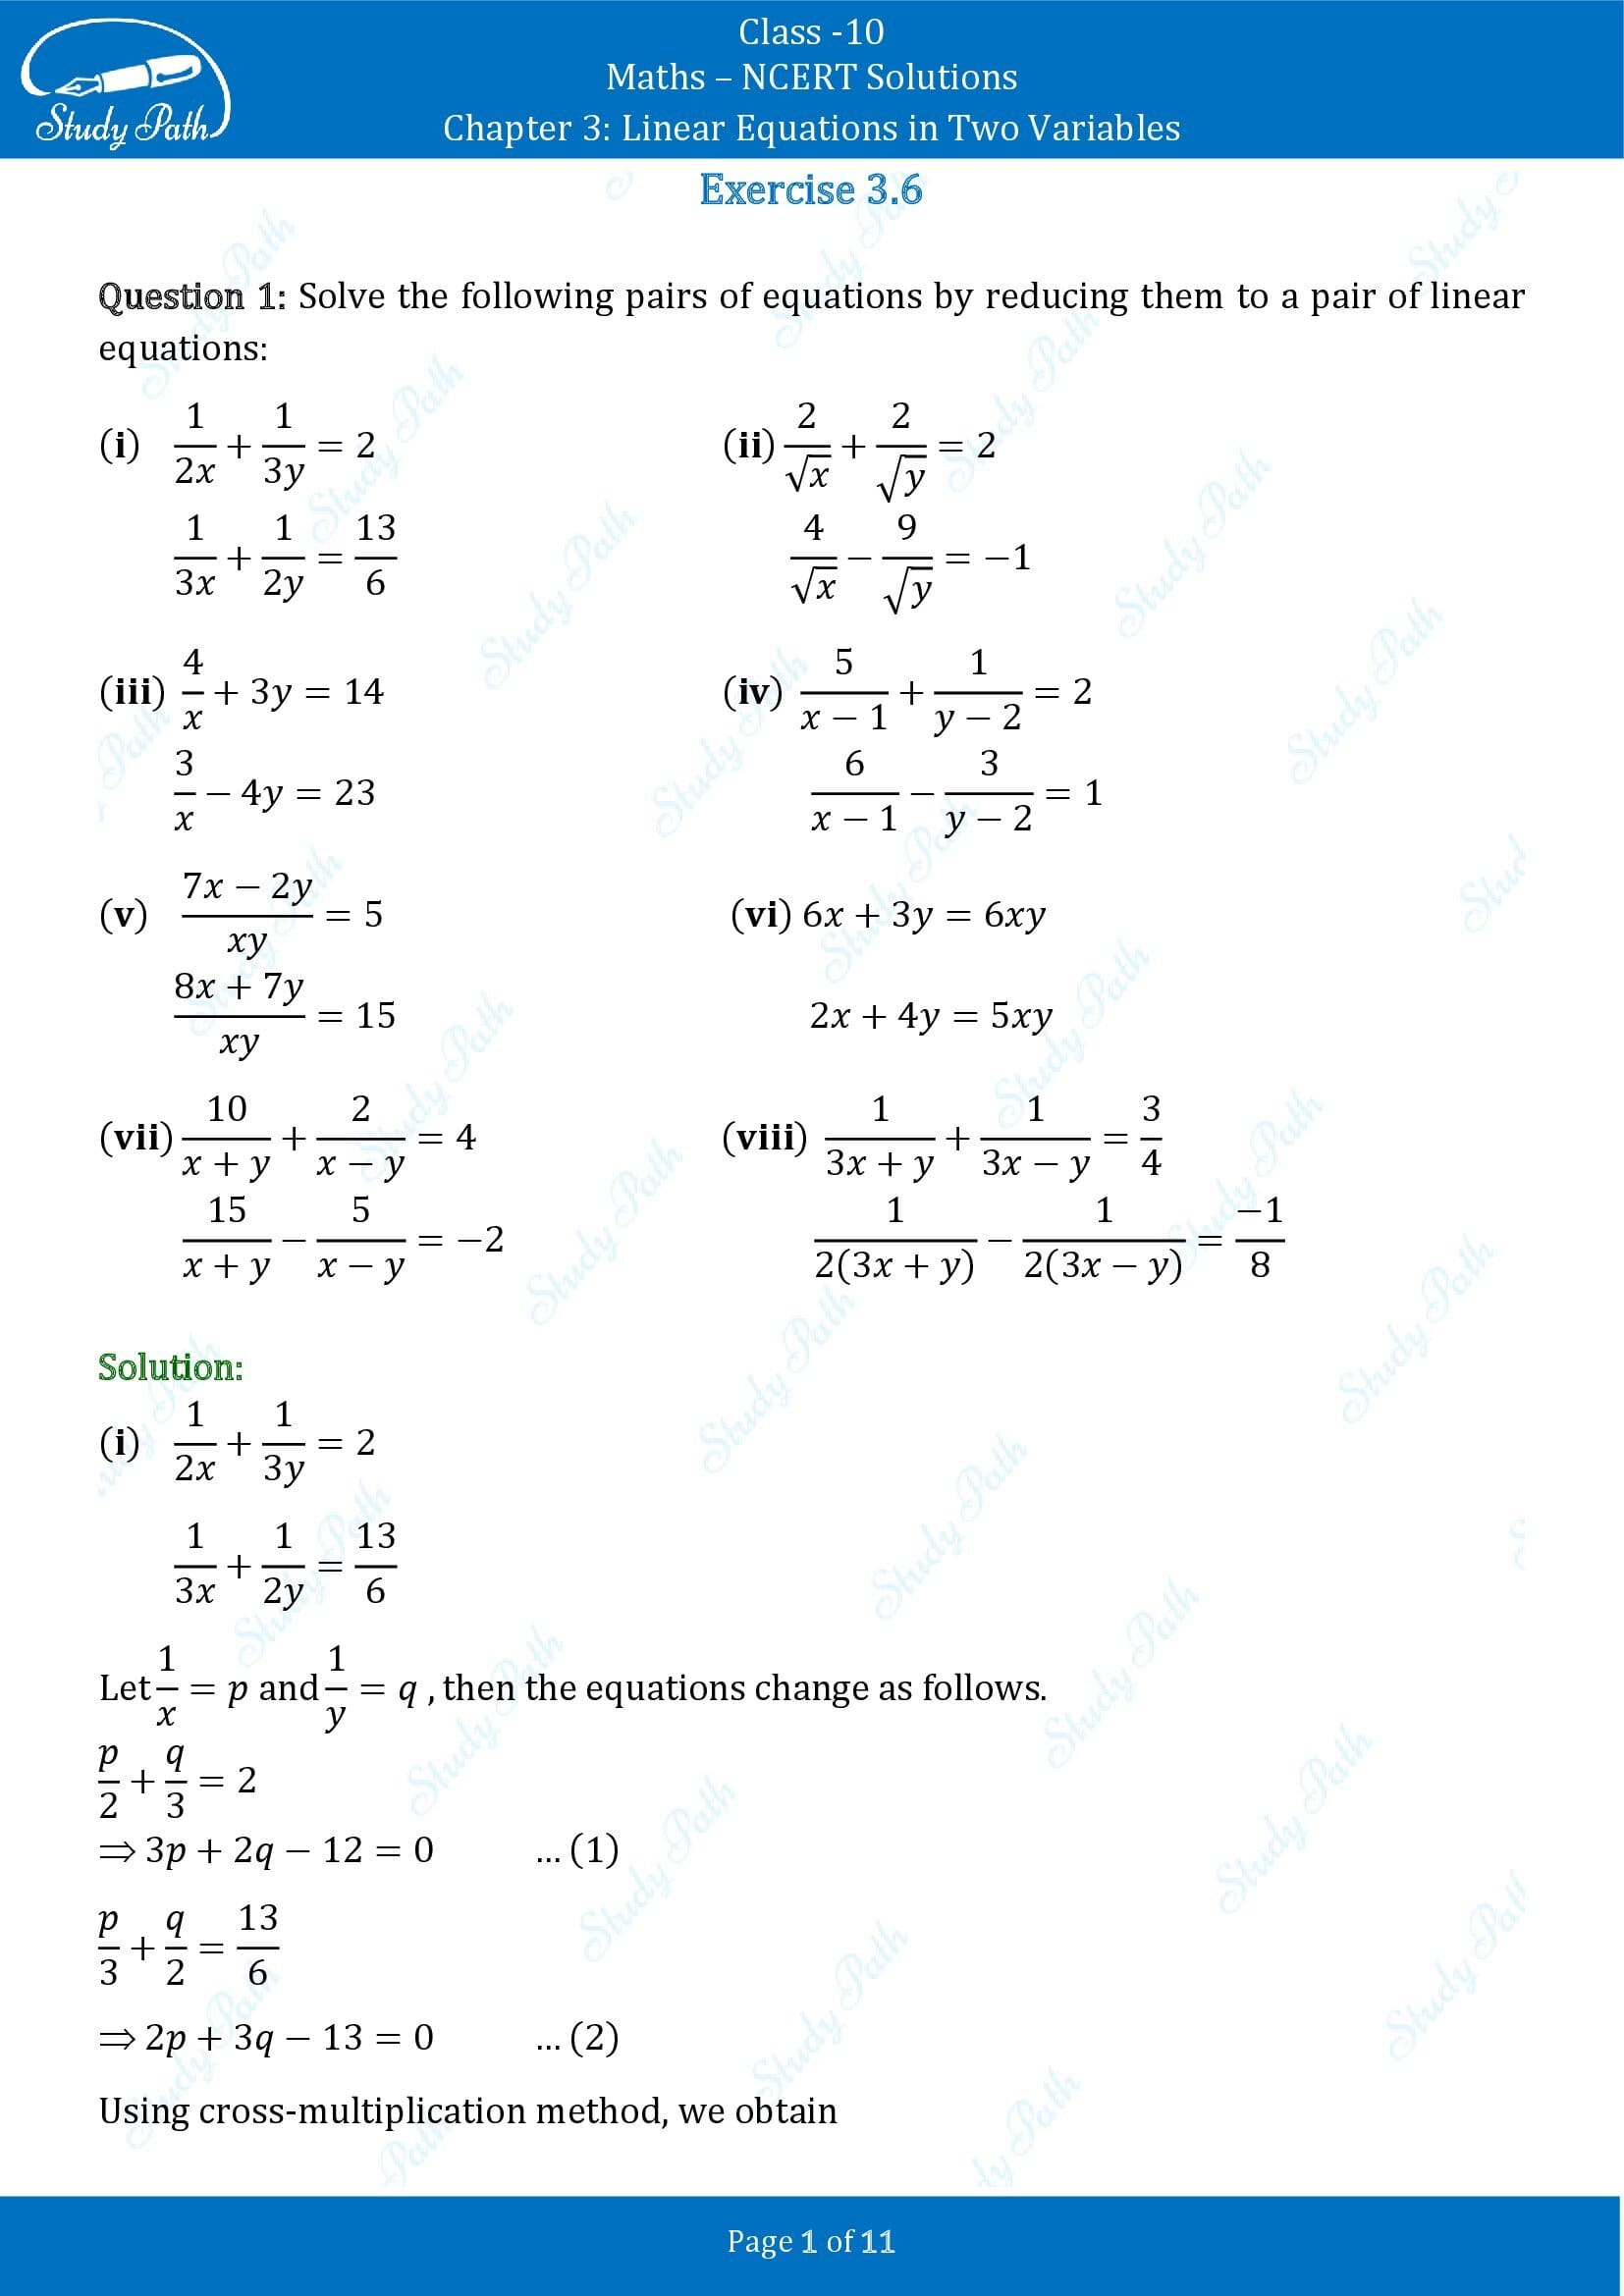 NCERT Solutions for Class 10 Maths Chapter 3 Linear Equations in Two Variables Exercise 3.6 00001